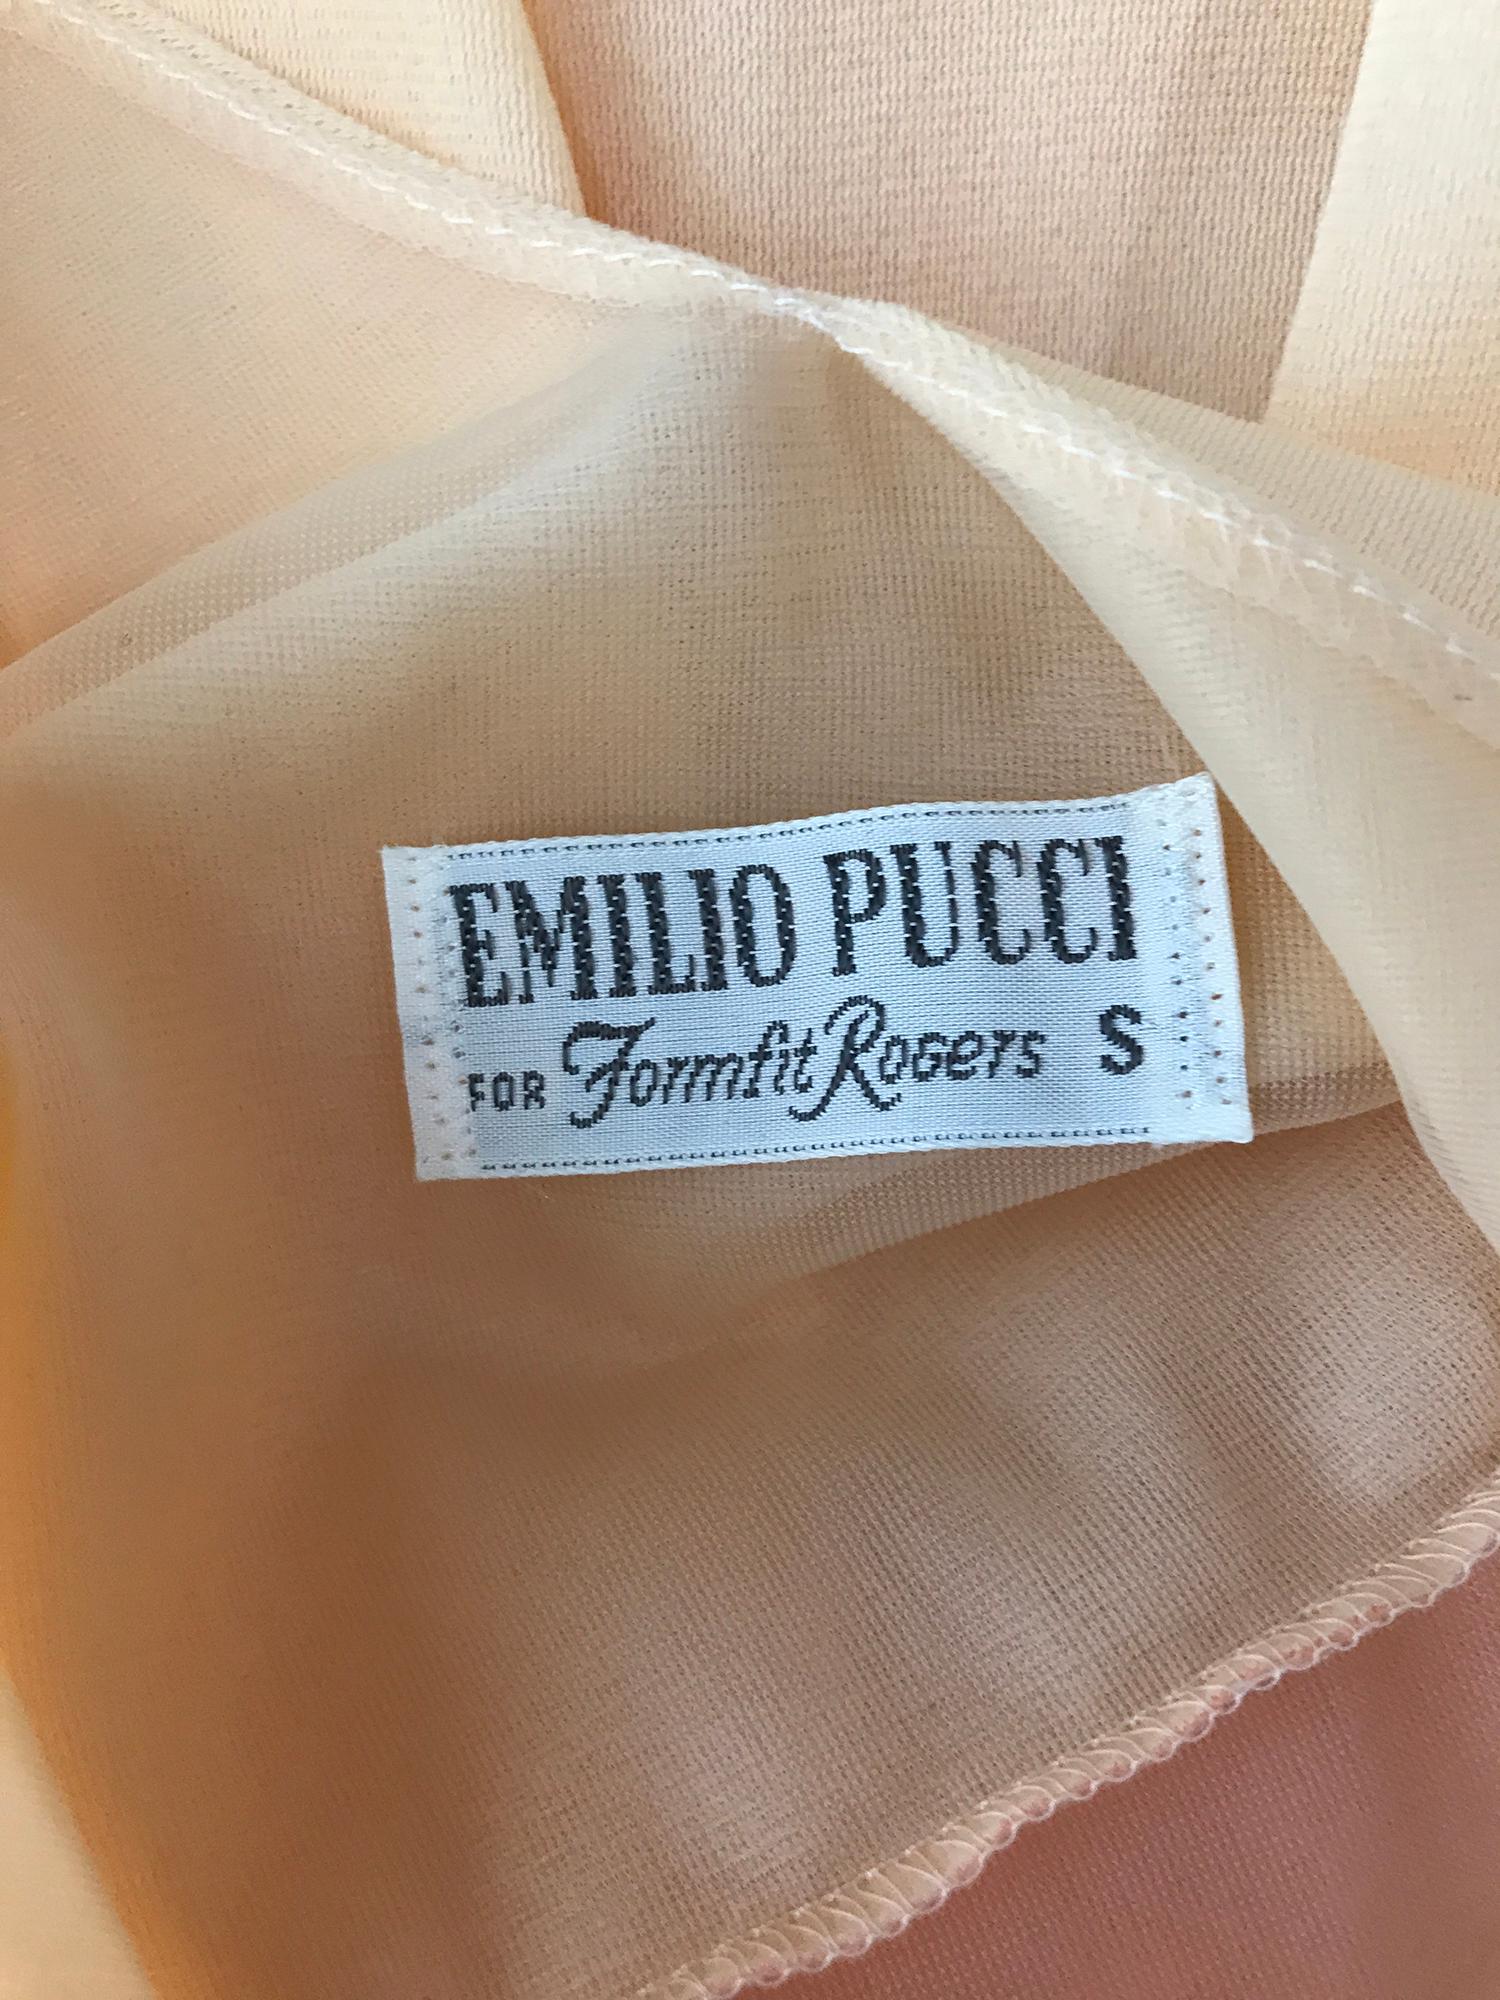 Emilio Pucci for Formfit Rogers 2pc. Sheer Peignoir Robe & Gown 1970s 4